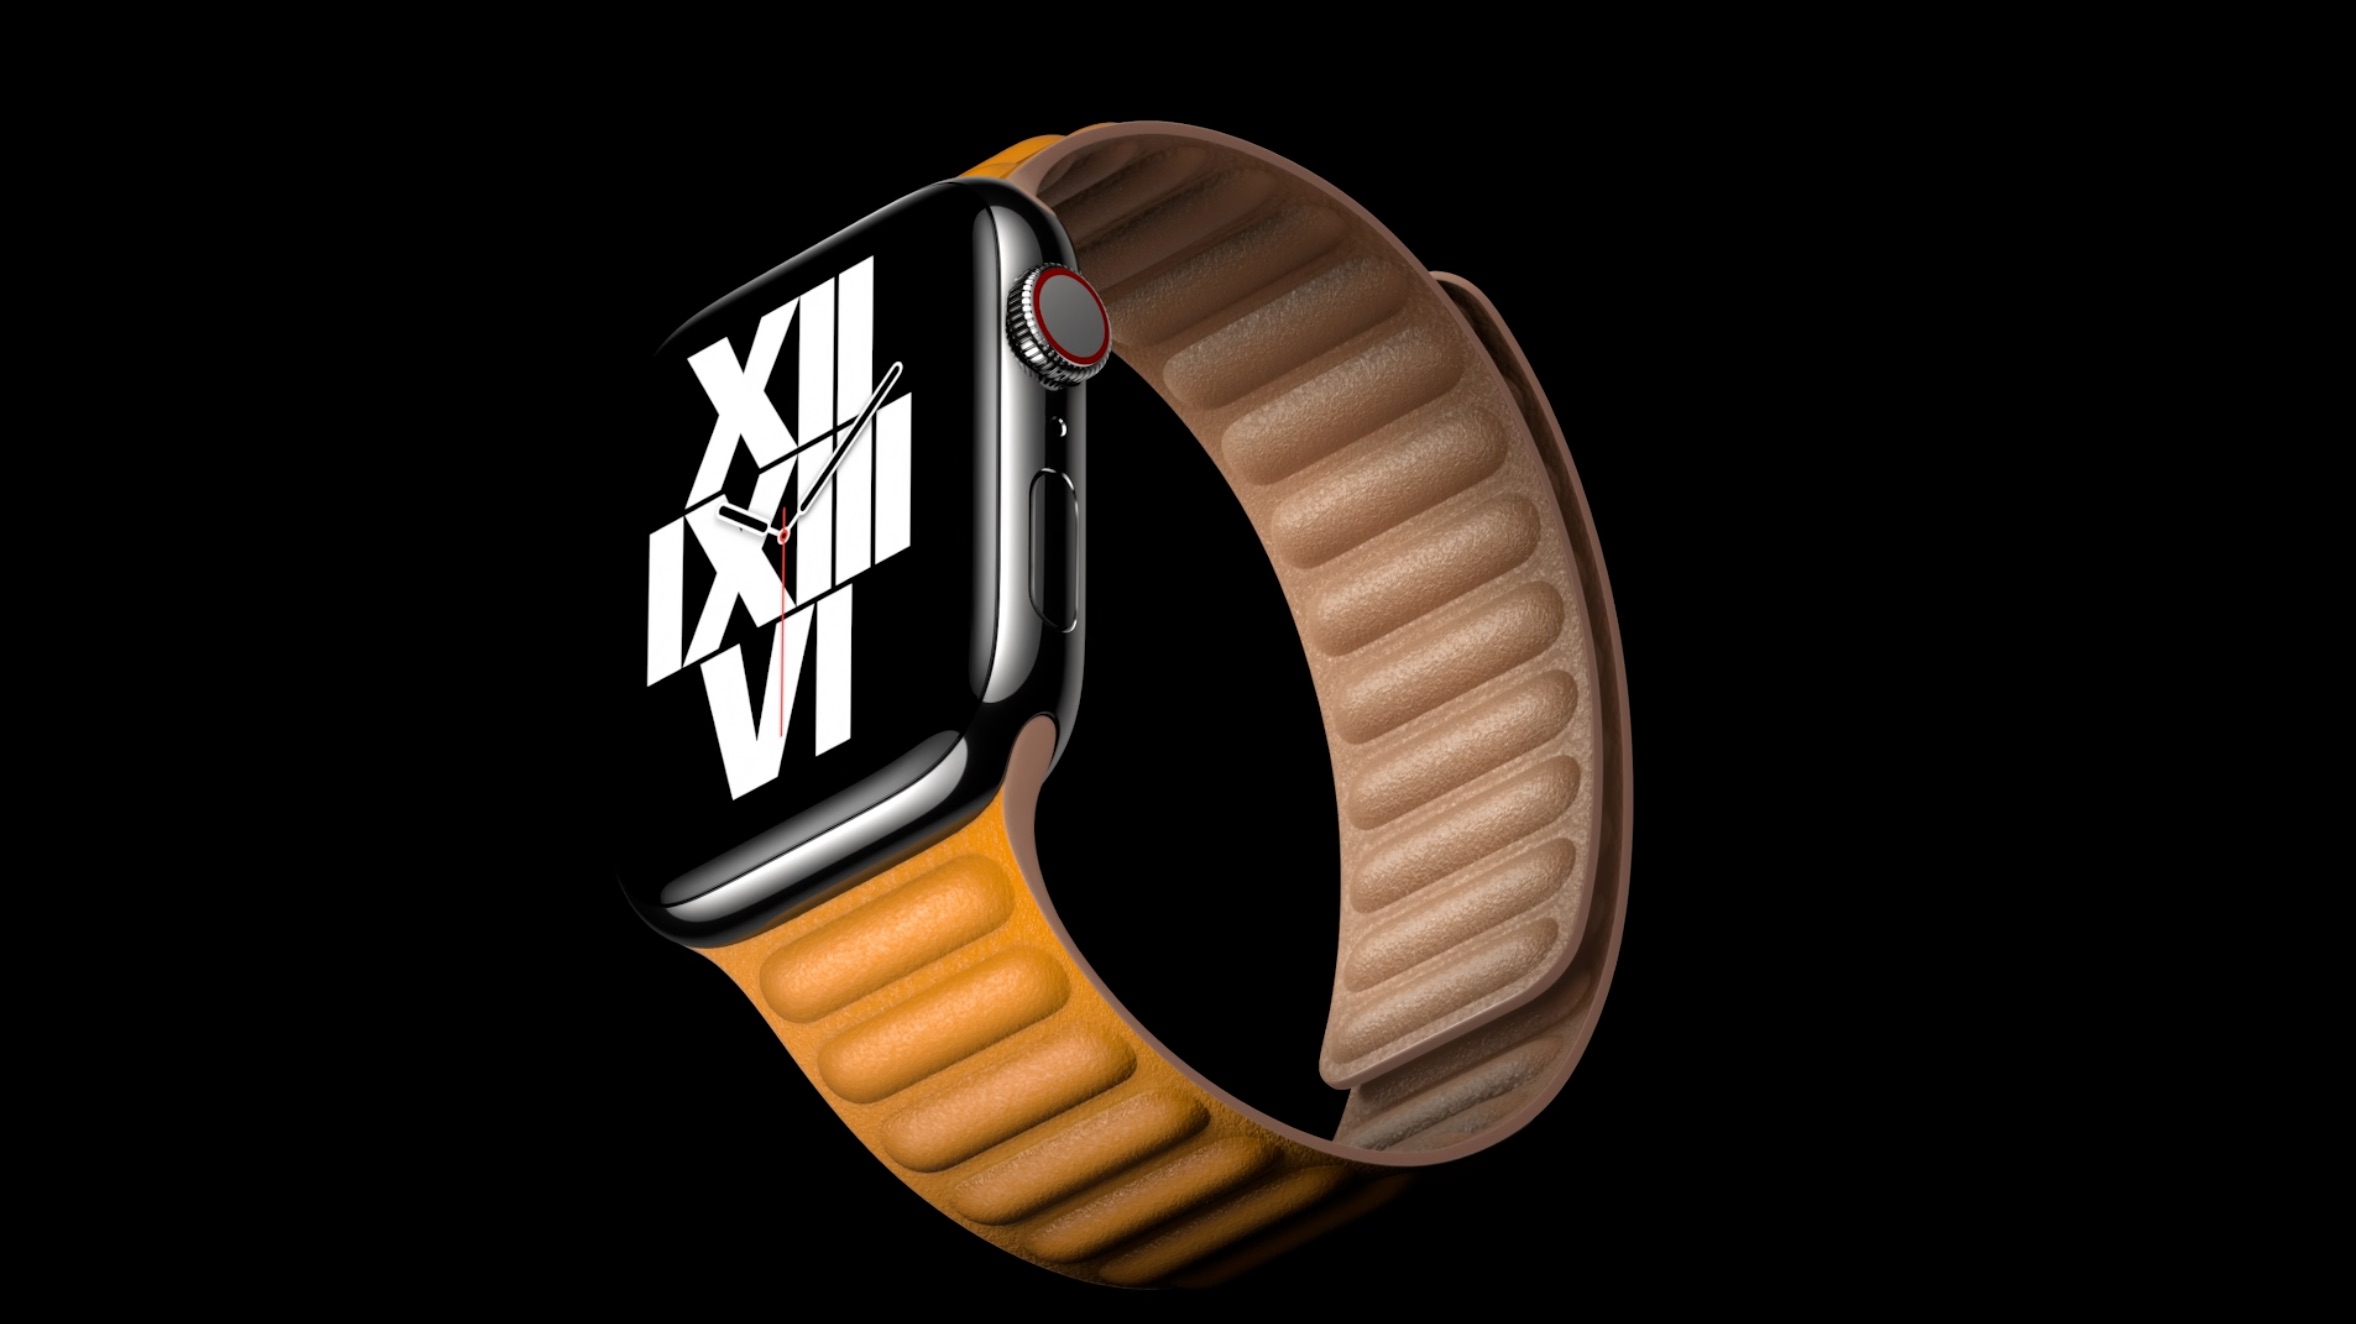 Apple Watch Series 6 Gets A Bunch Of New Faces And Bands Slashgear